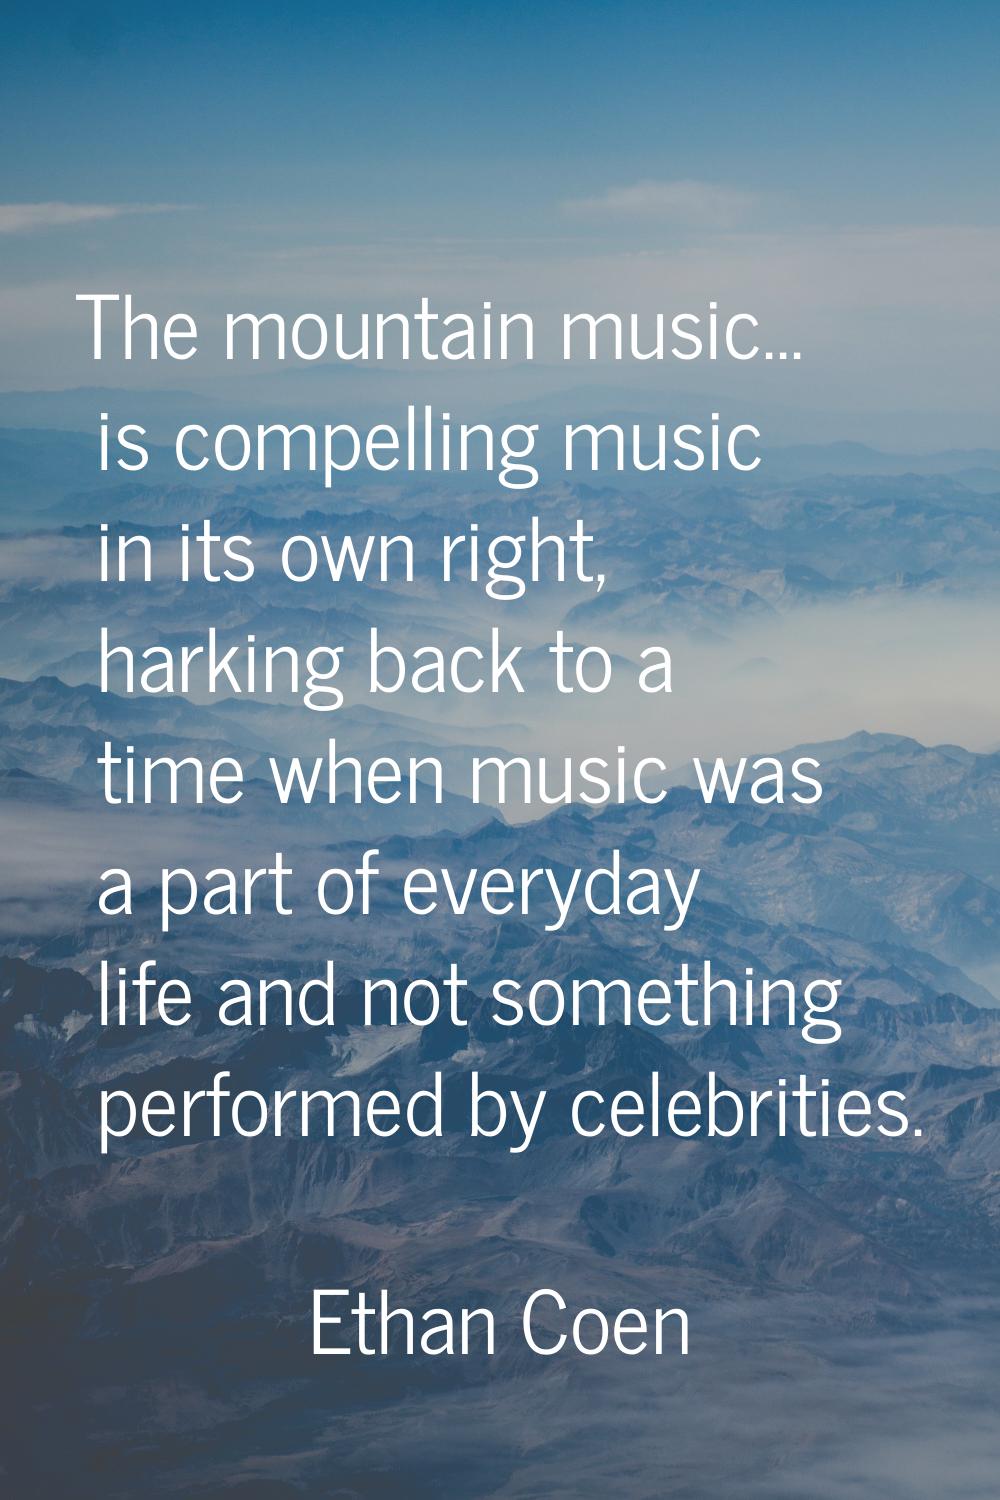 The mountain music... is compelling music in its own right, harking back to a time when music was a